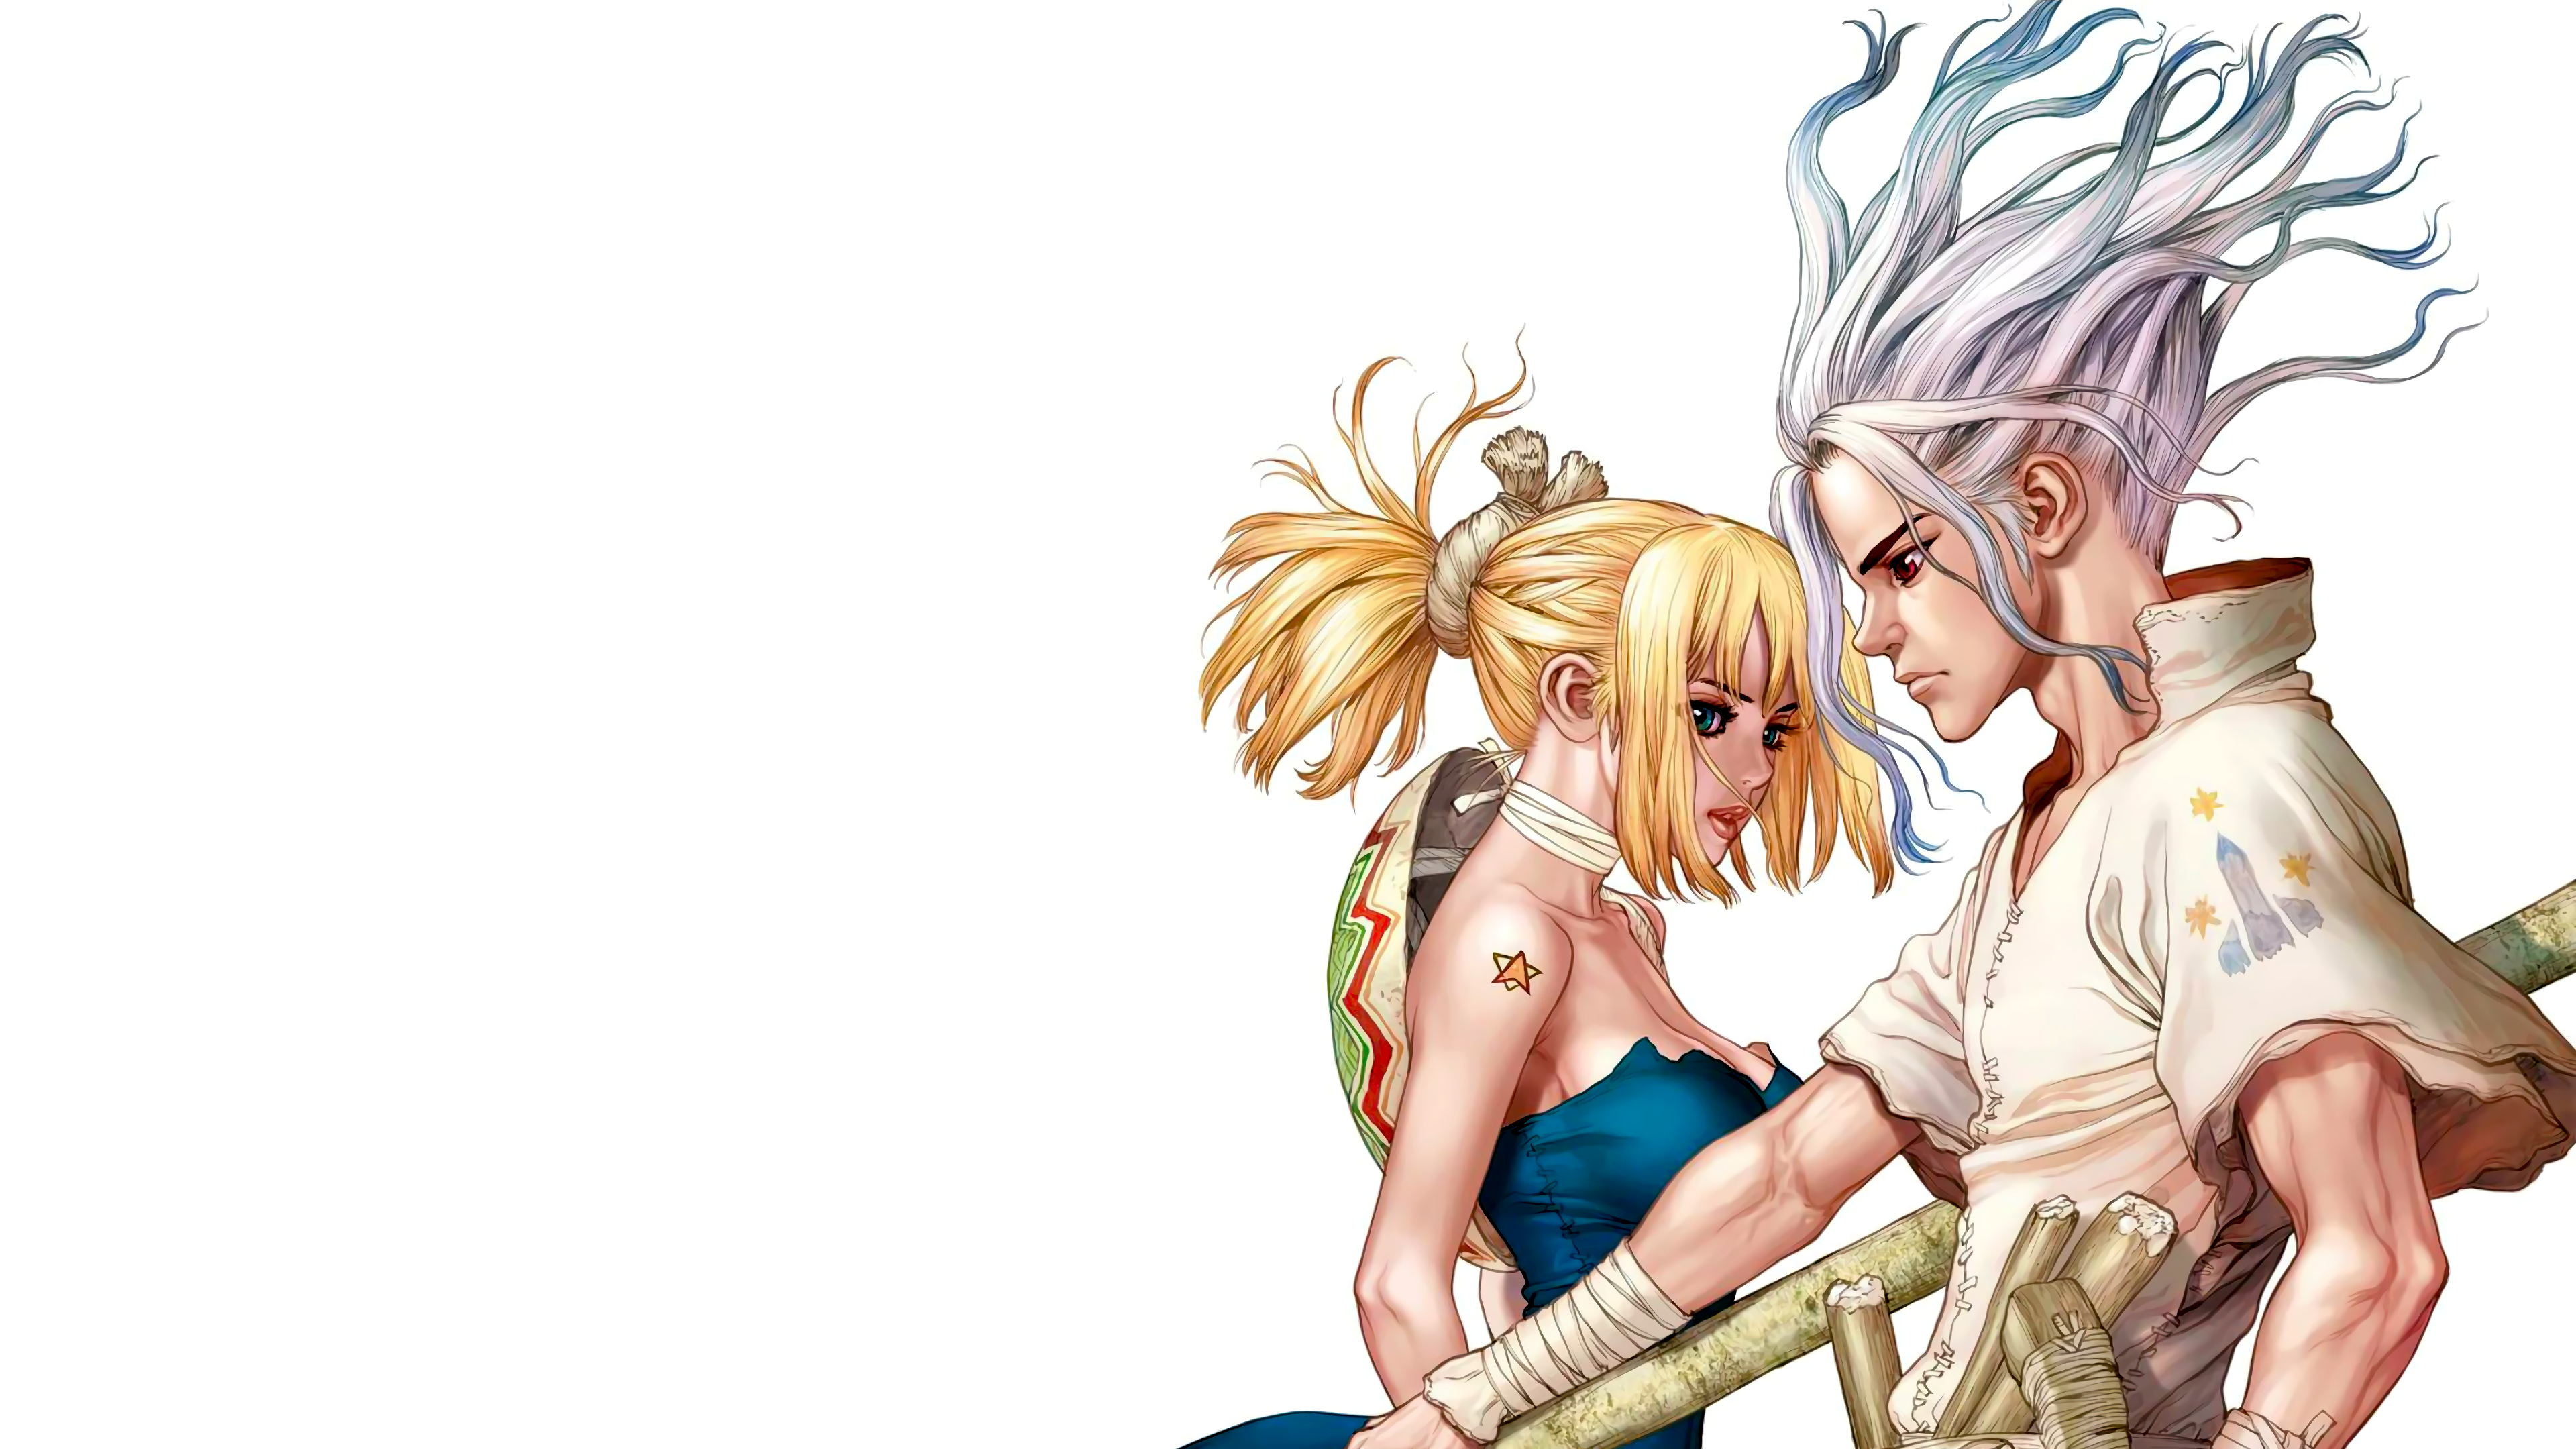 Senku Ishigami In Space Dr. Stone Wallpapers